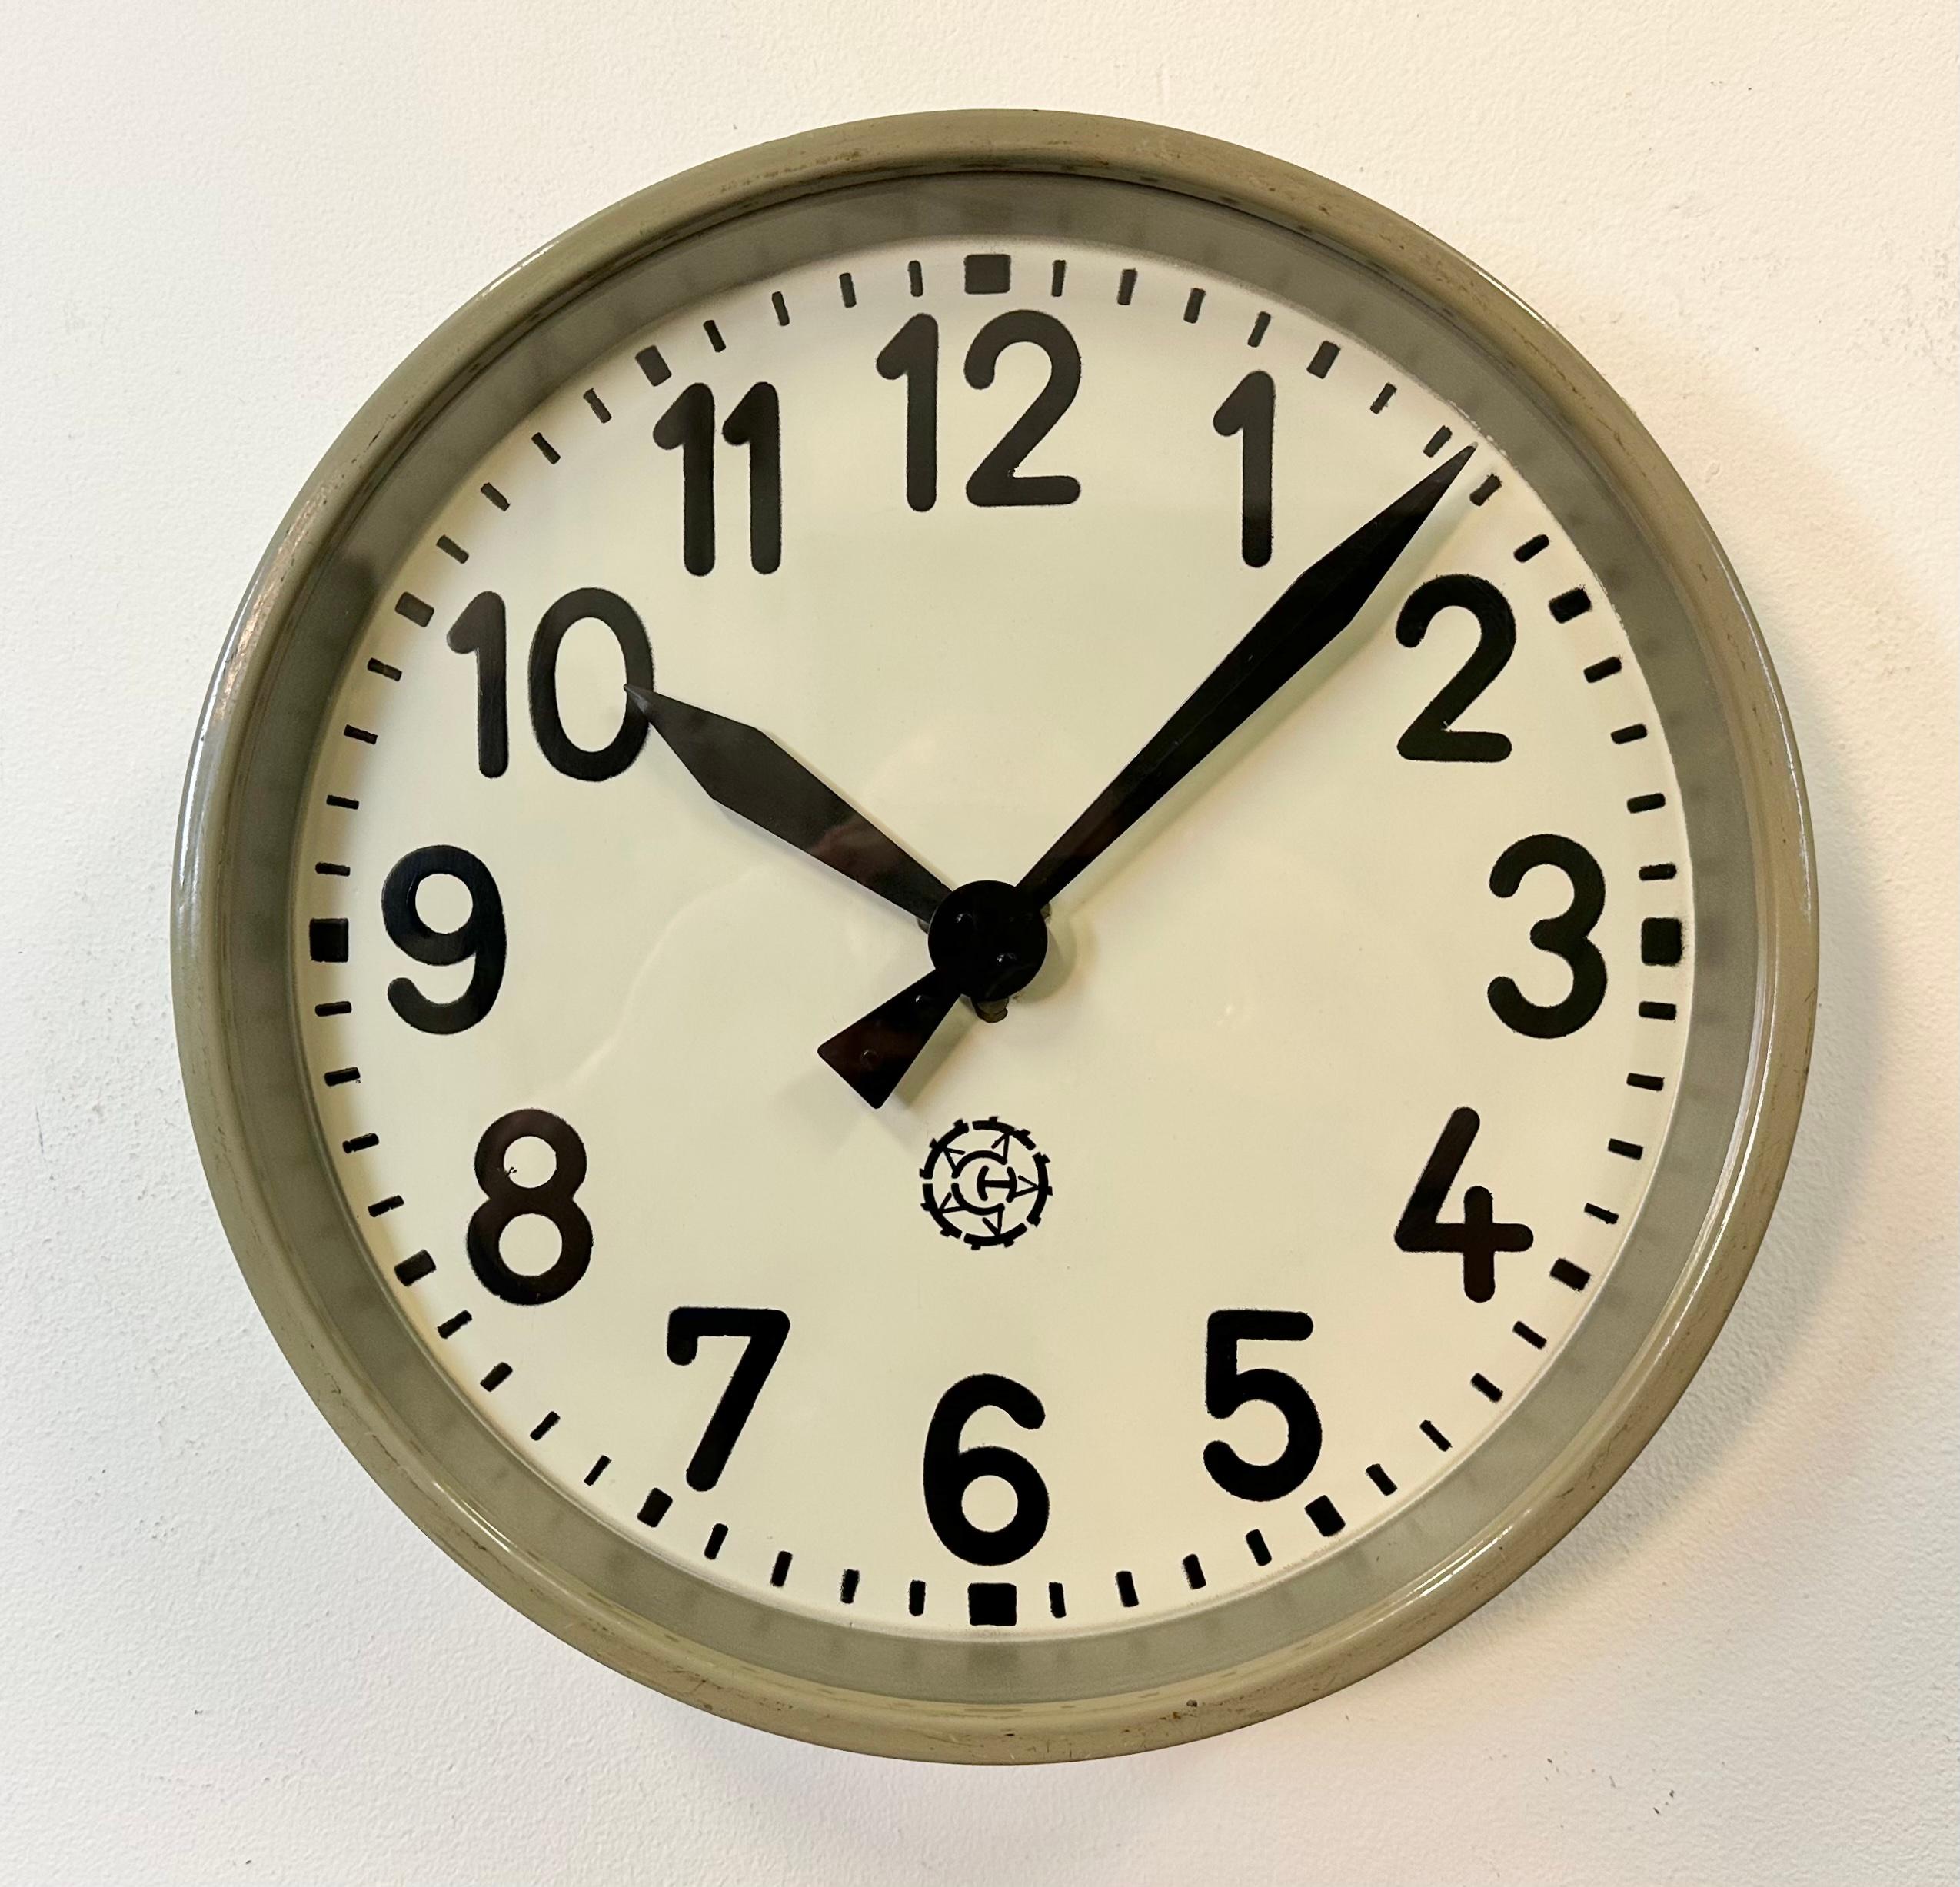 This factory wall clock wad produced by Chronotechna in former Czechoslovakia during the 1950s. It features a grey metal frame, an iron dial, an aluminum hands and a clear glass cover. The piece has been converted into a battery-powered clockwork